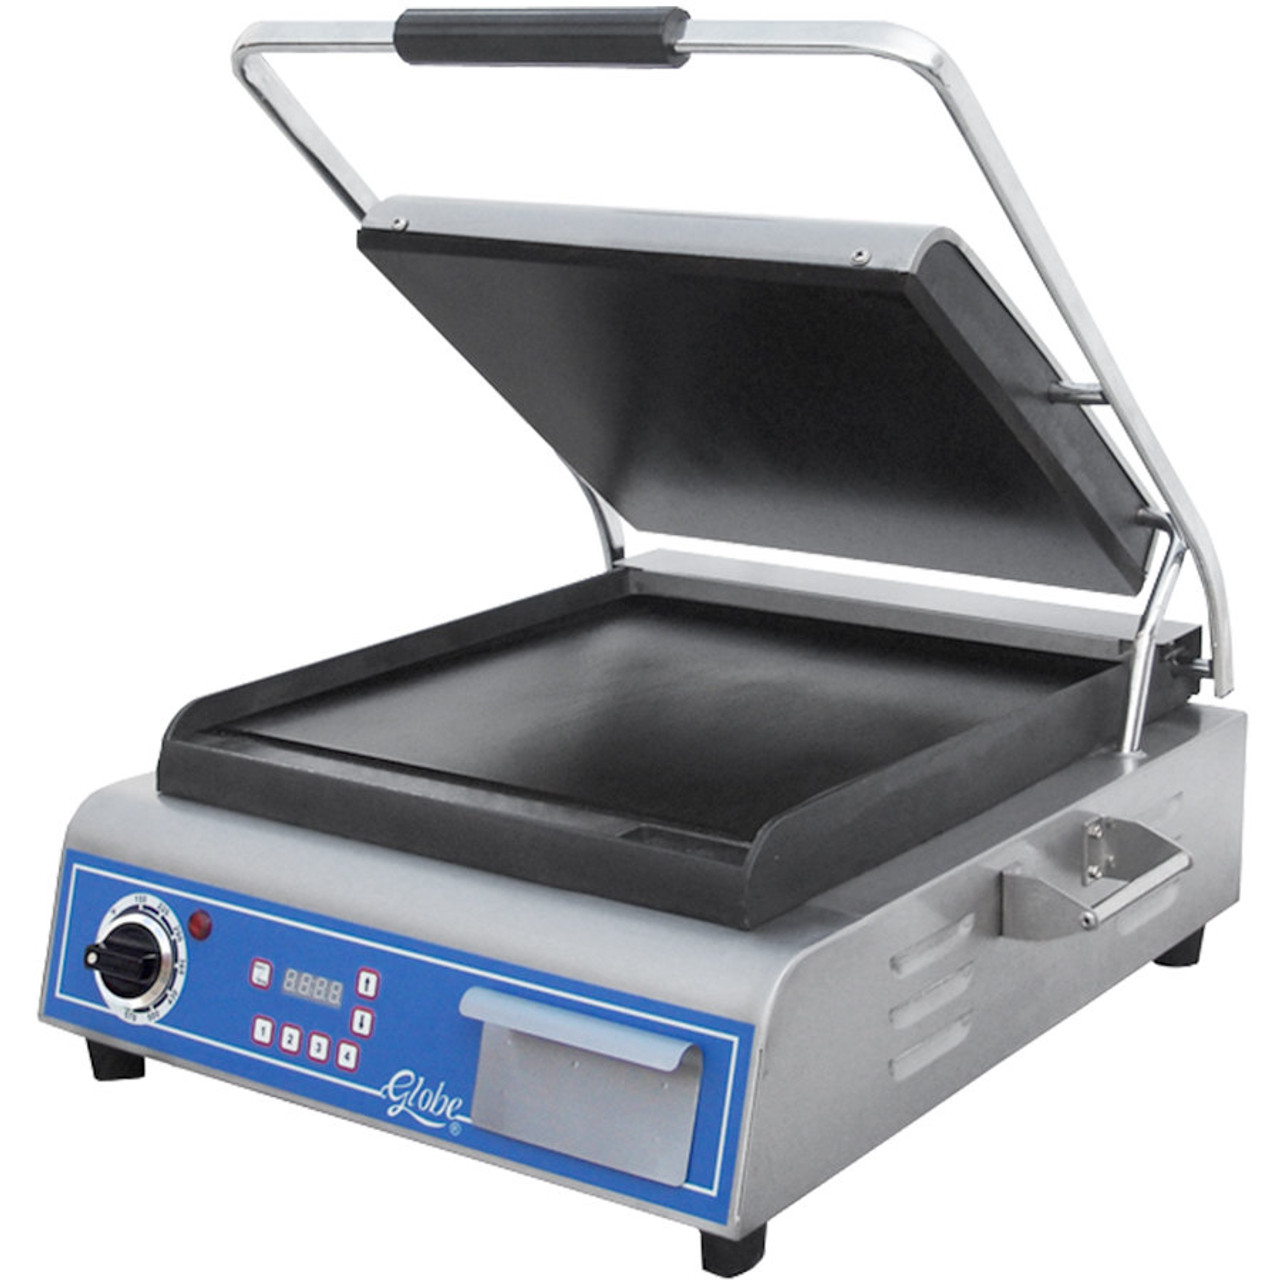 Deluxe Sandwich Grill with Smooth Plates - 14" x 14" Cooking Surface - 120V, 1800W-Globe GSG14D 